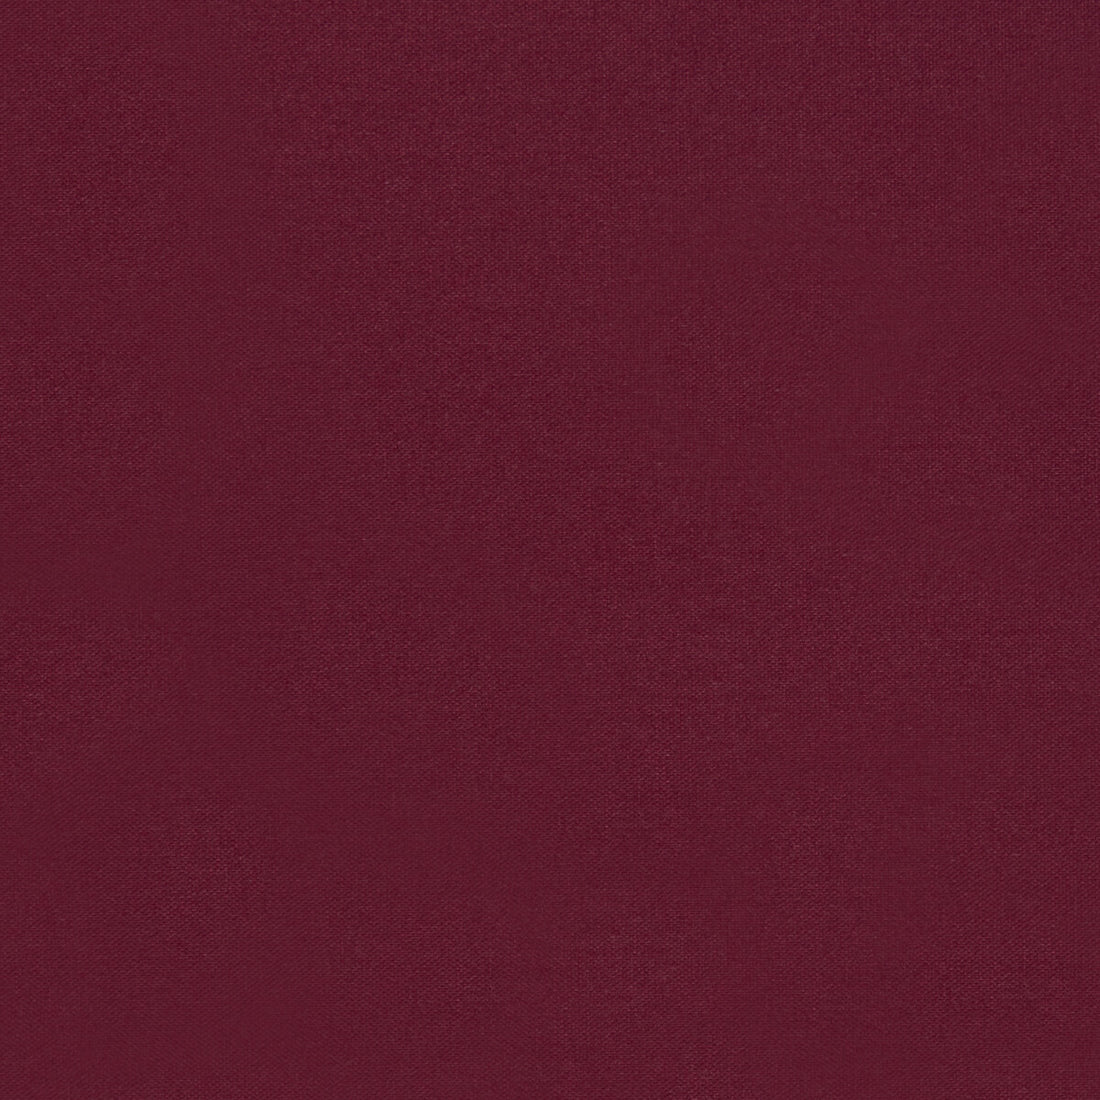 Kravet Contract fabric in 3873-909 color - pattern 3873.909.0 - by Kravet Contract